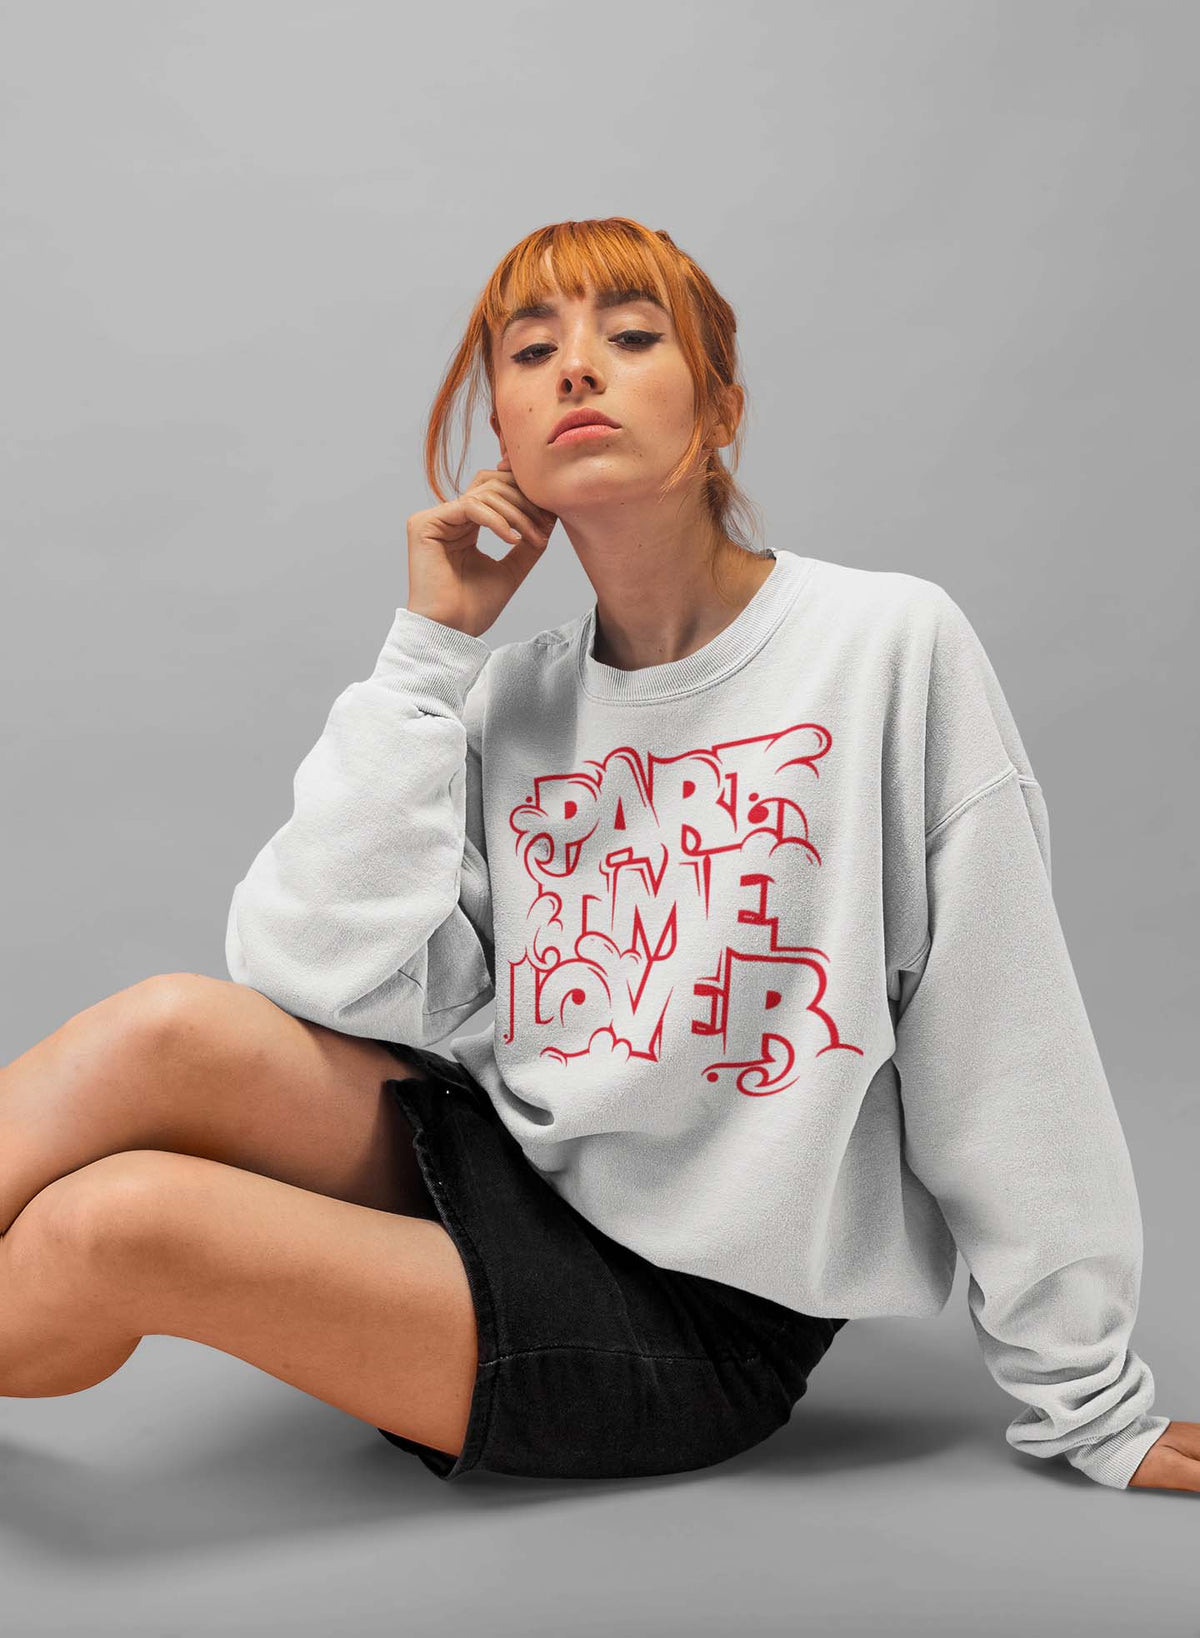 Part Time Lover relaxed Fit Sweatshirt For Women